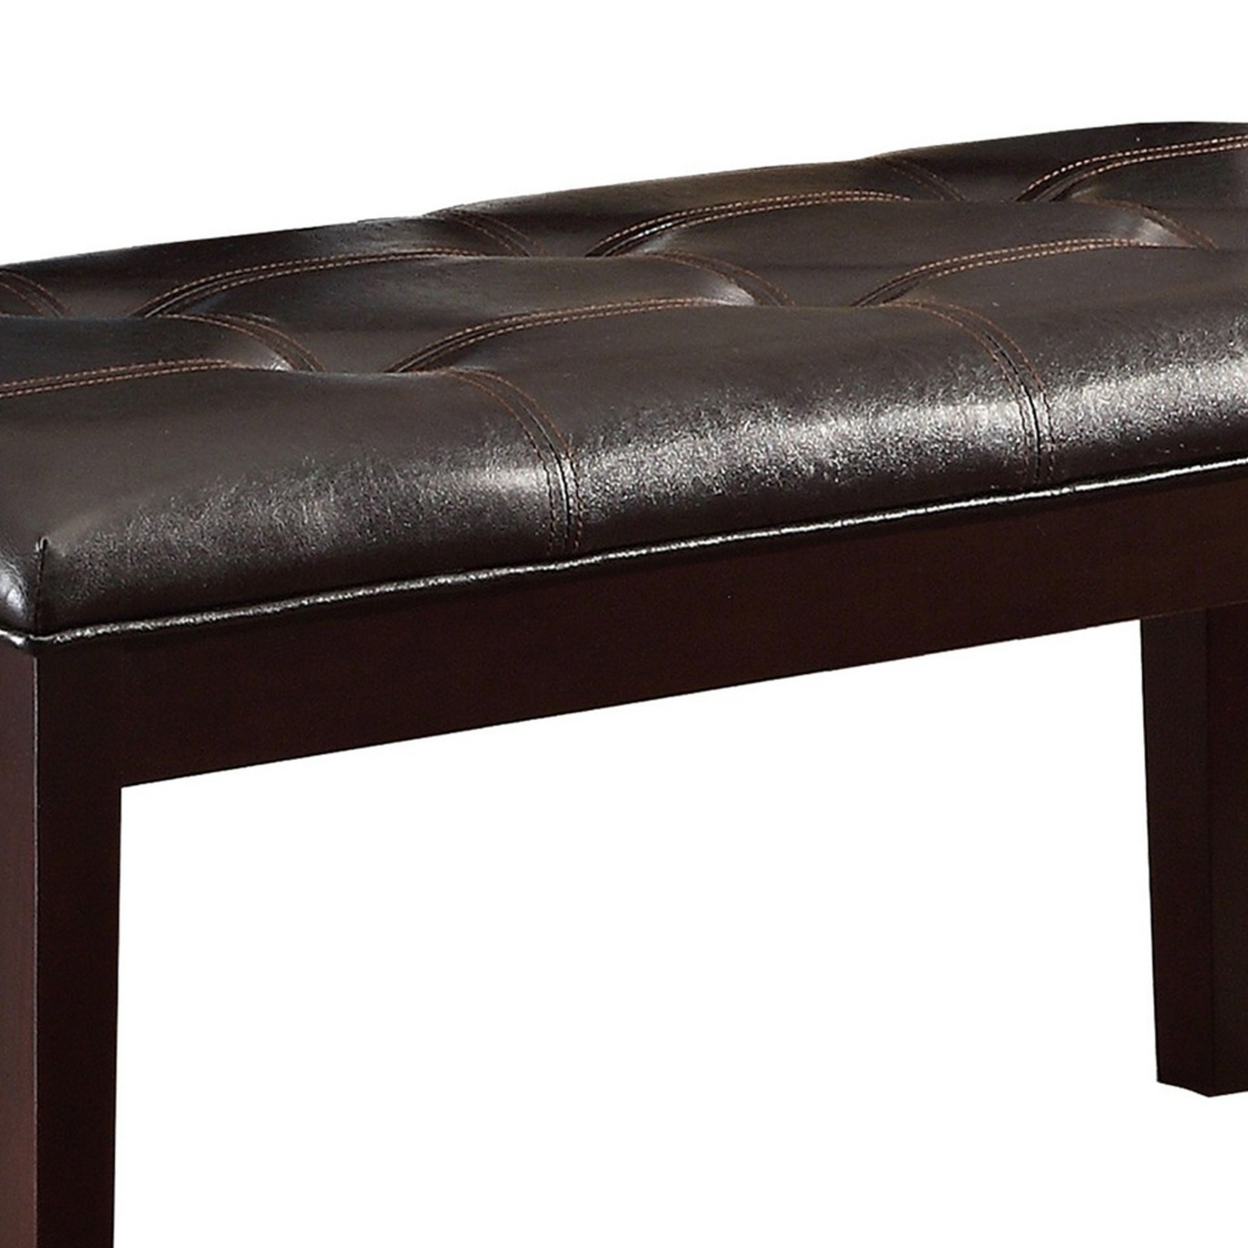 Button Tufted Faux Leather Upholstered Wooden Bench, Espresso Brown- Saltoro Sherpi